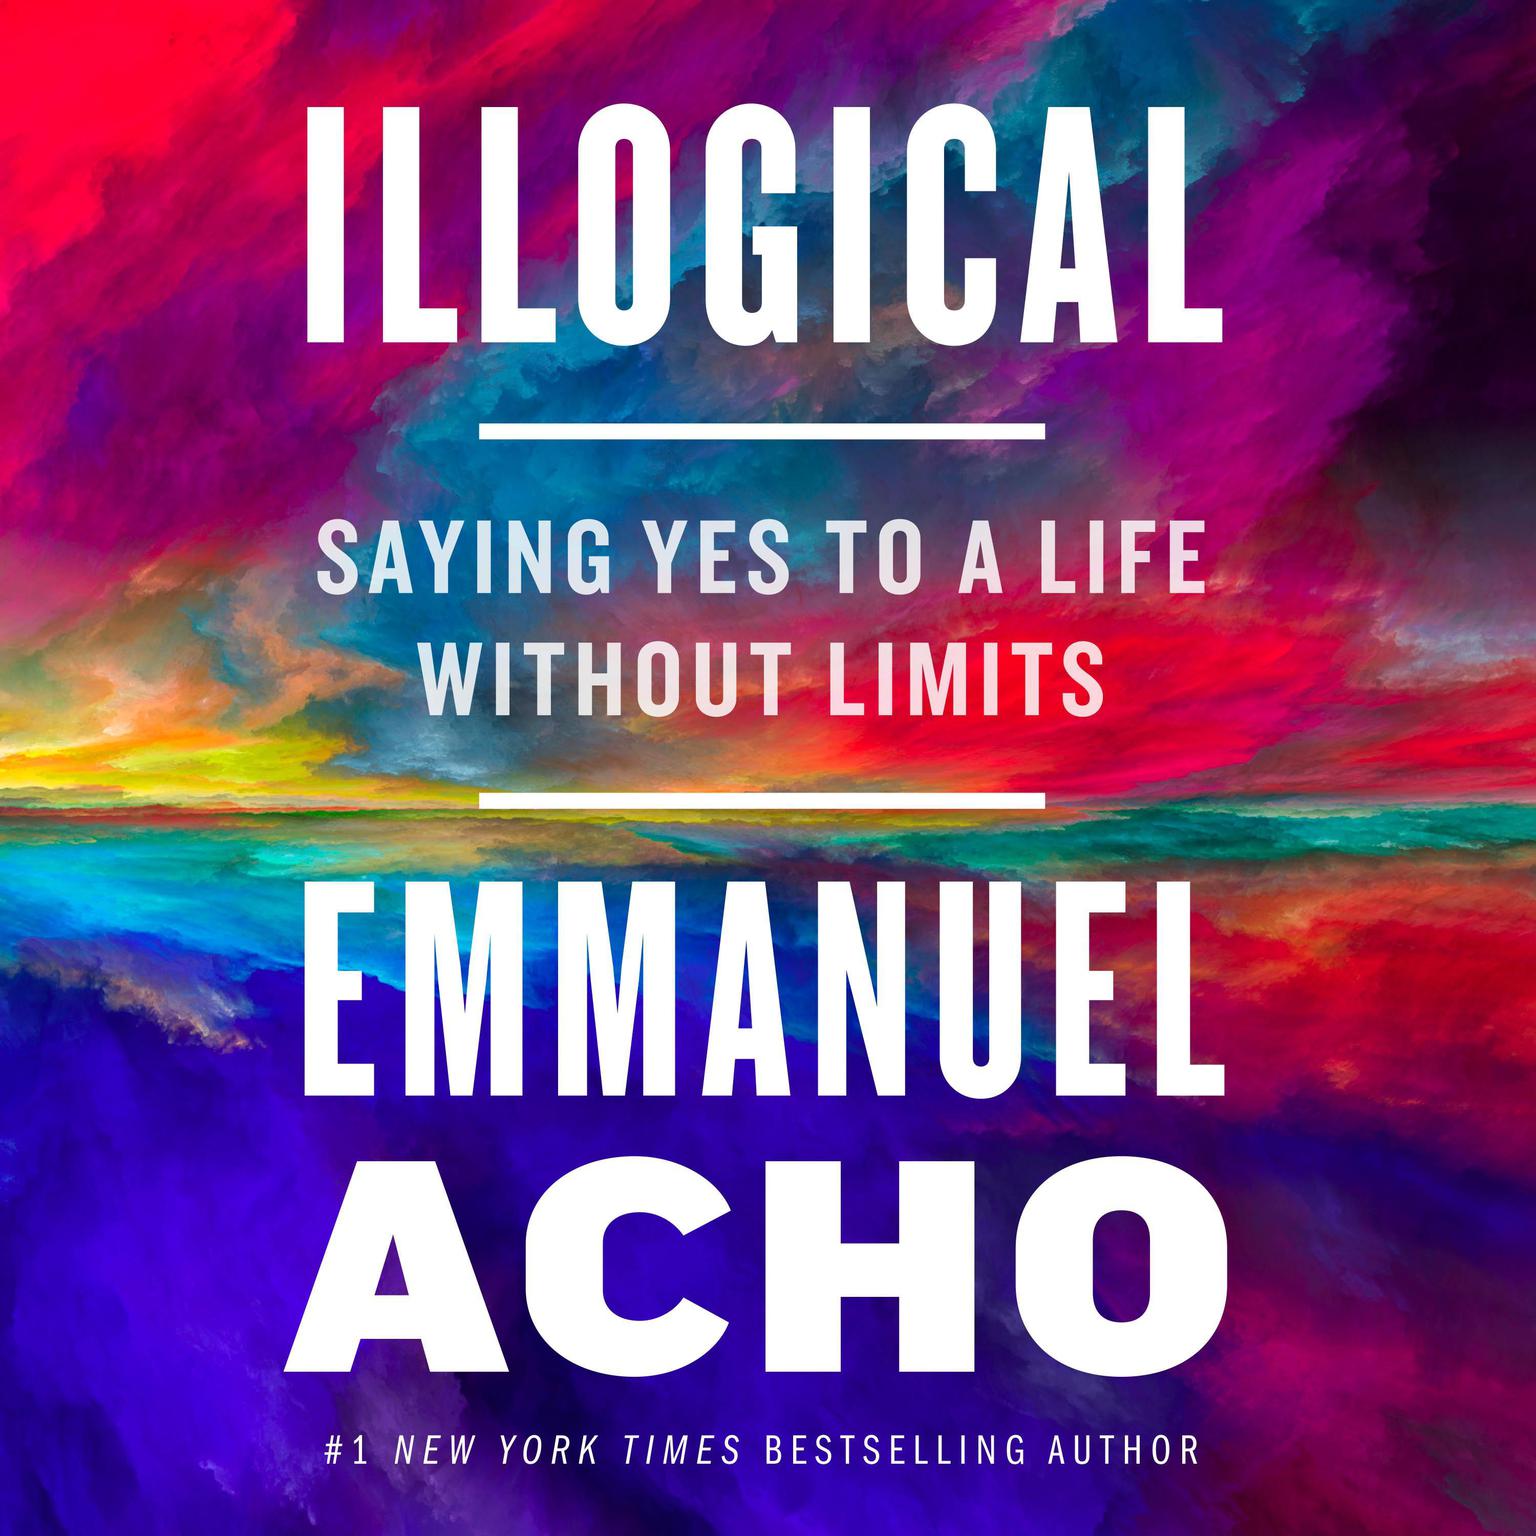 Illogical: Saying Yes to a Life Without Limits Audiobook, by Emmanuel Acho